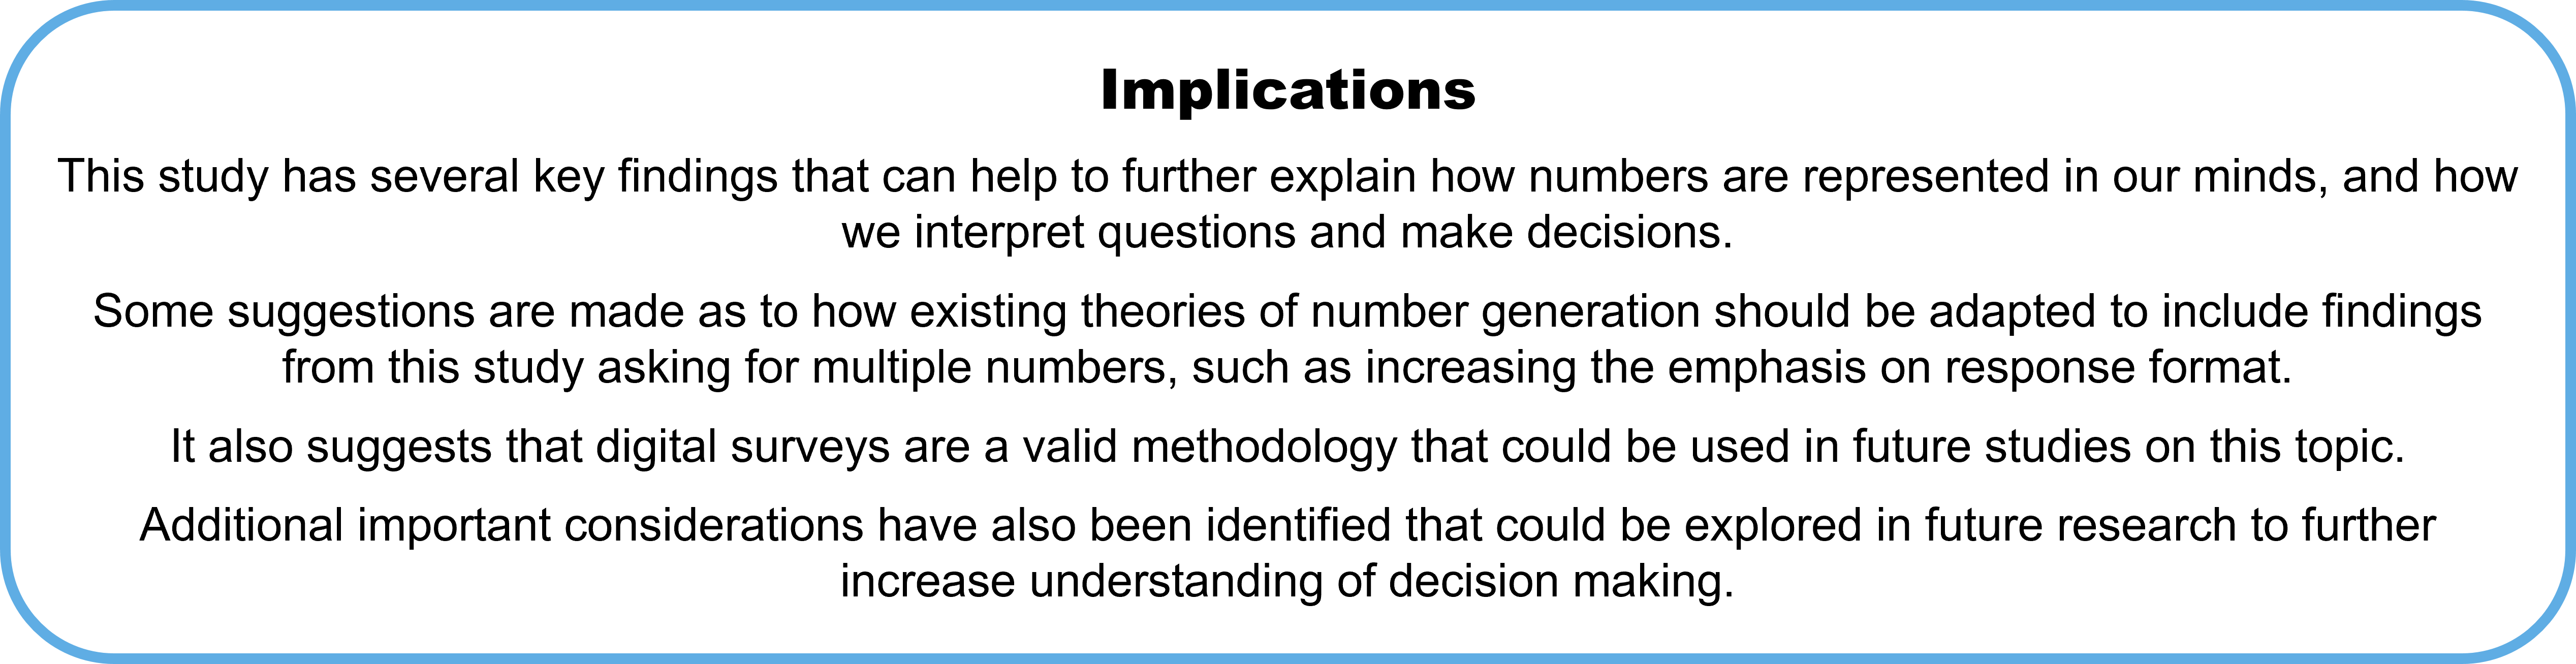 Implications This study has several key findings that can help to further explain how numbers are represented in our minds, and how we interpret questions and make decisions.  Some suggestions are made as to how existing theories of number generation should be adapted to include findings from this study asking for multiple numbers, such as increasing the emphasis on response format. It also suggests that digital surveys are a valid methodology that could be used in future studies on this topic. Additional important considerations have also been identified that could be explored in future research to further increase understanding of decision making.